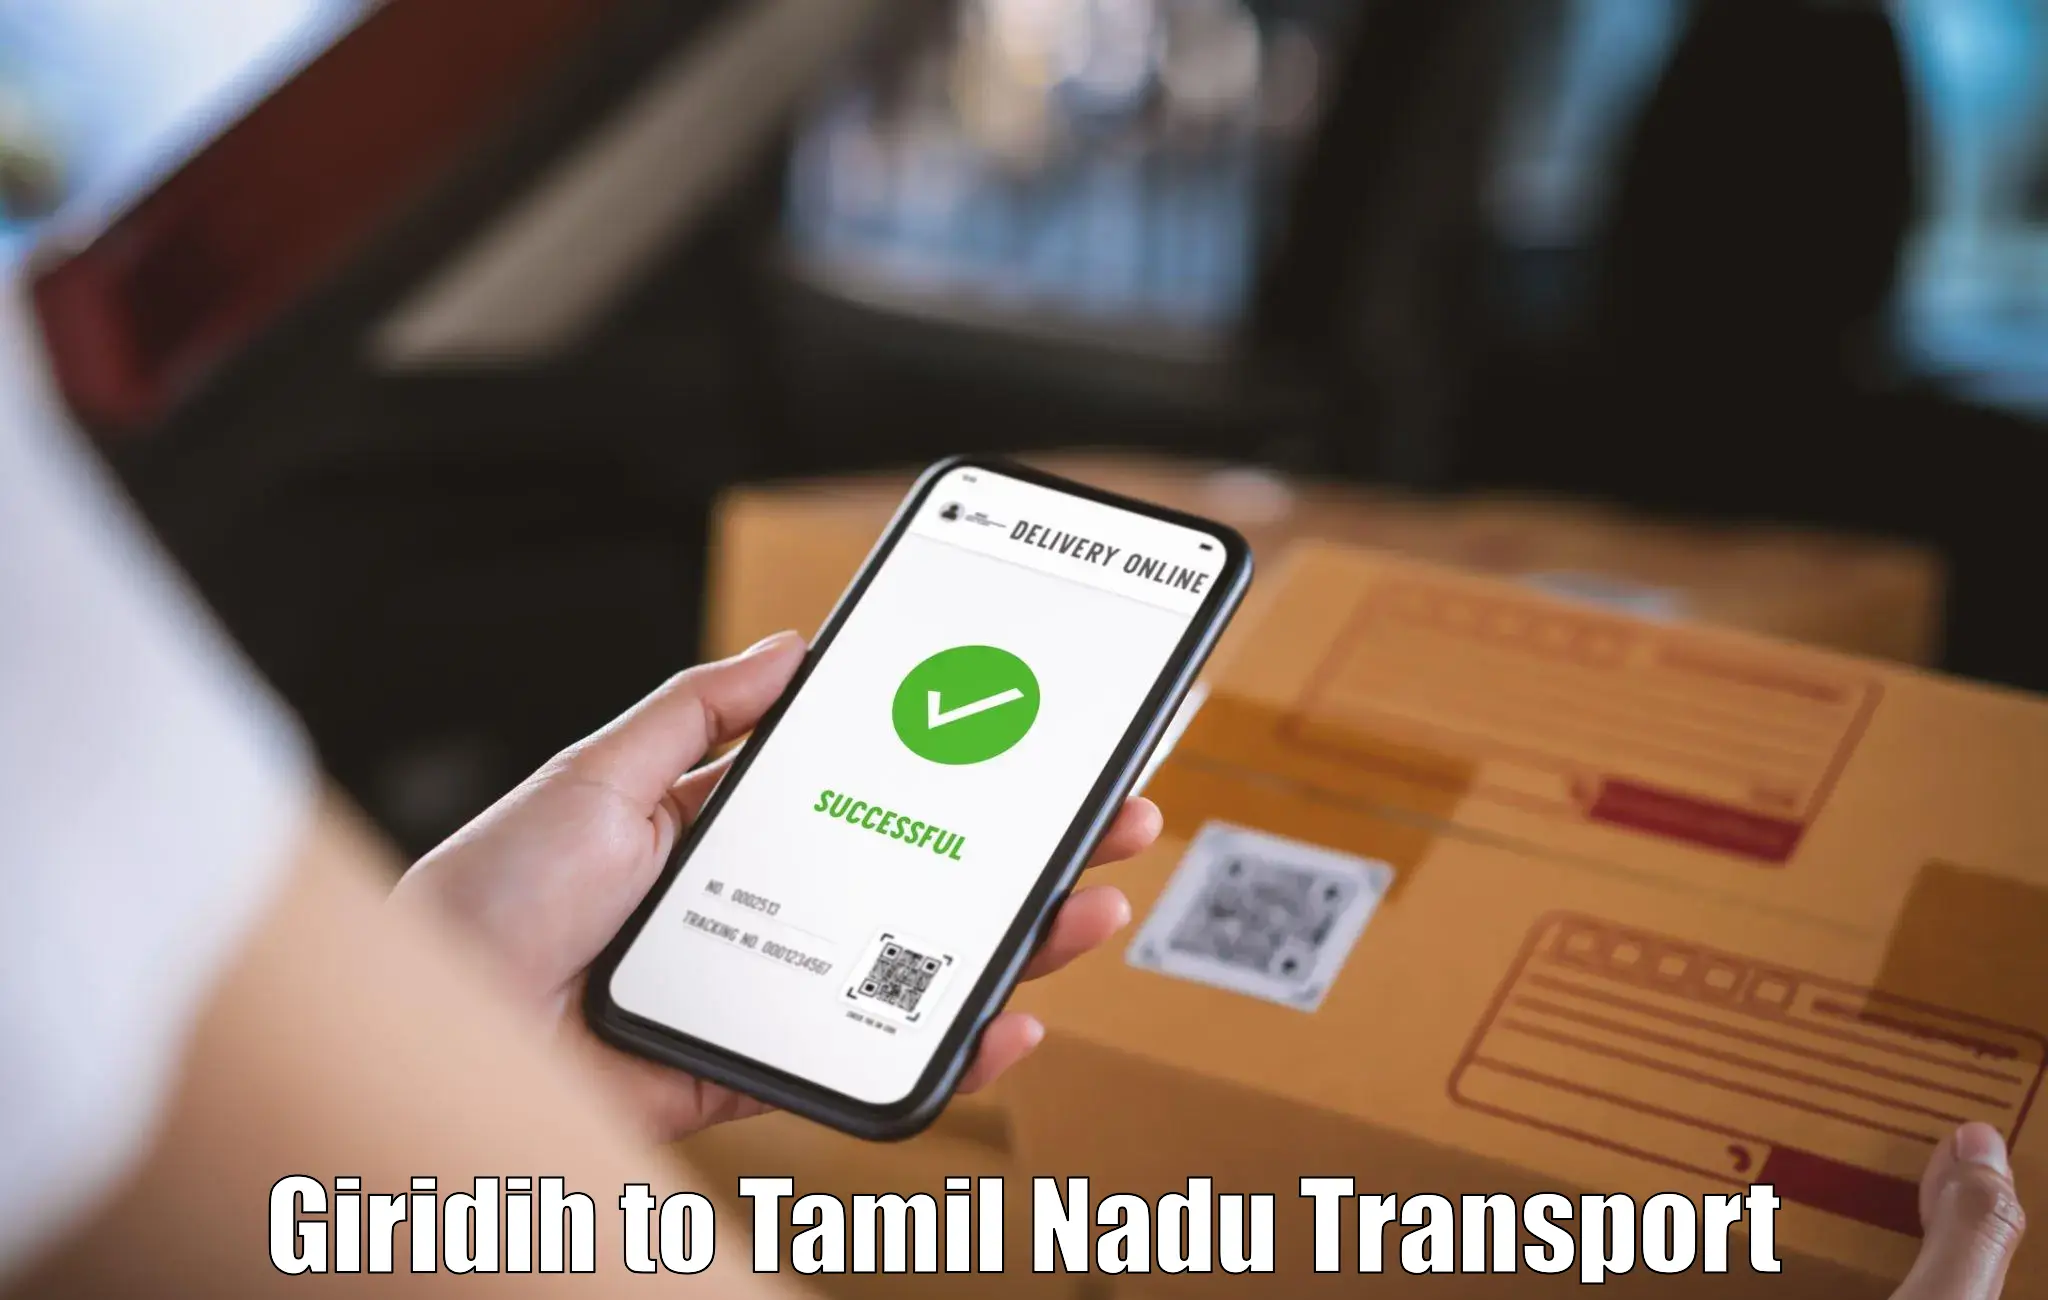 Container transportation services Giridih to Tamil Nadu